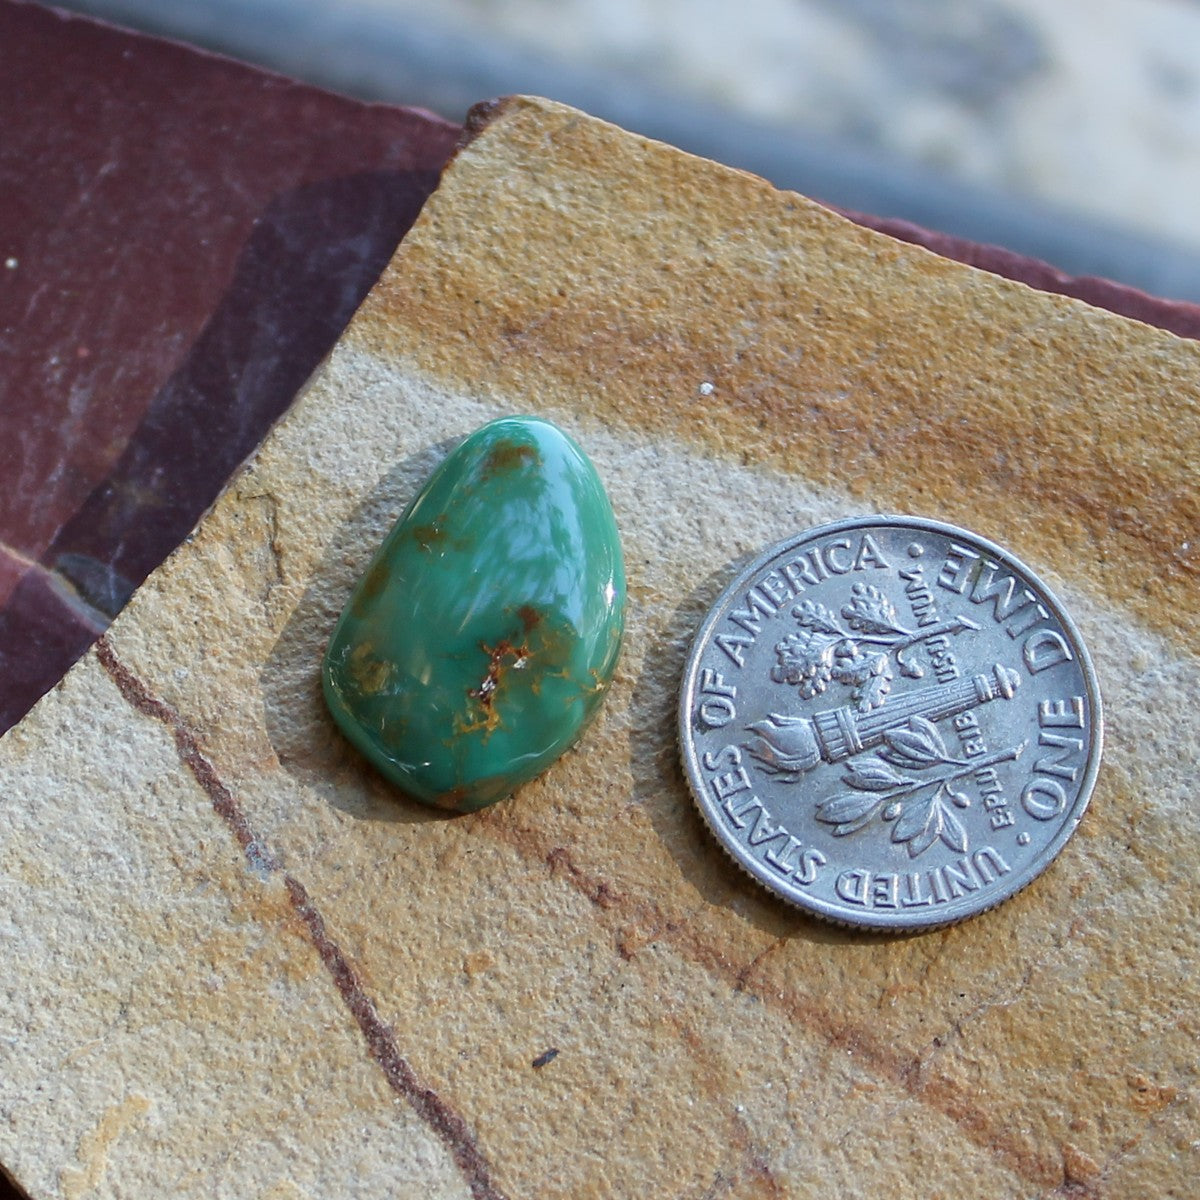 5.9 carat green Stone Mountain Turquoise cabochon